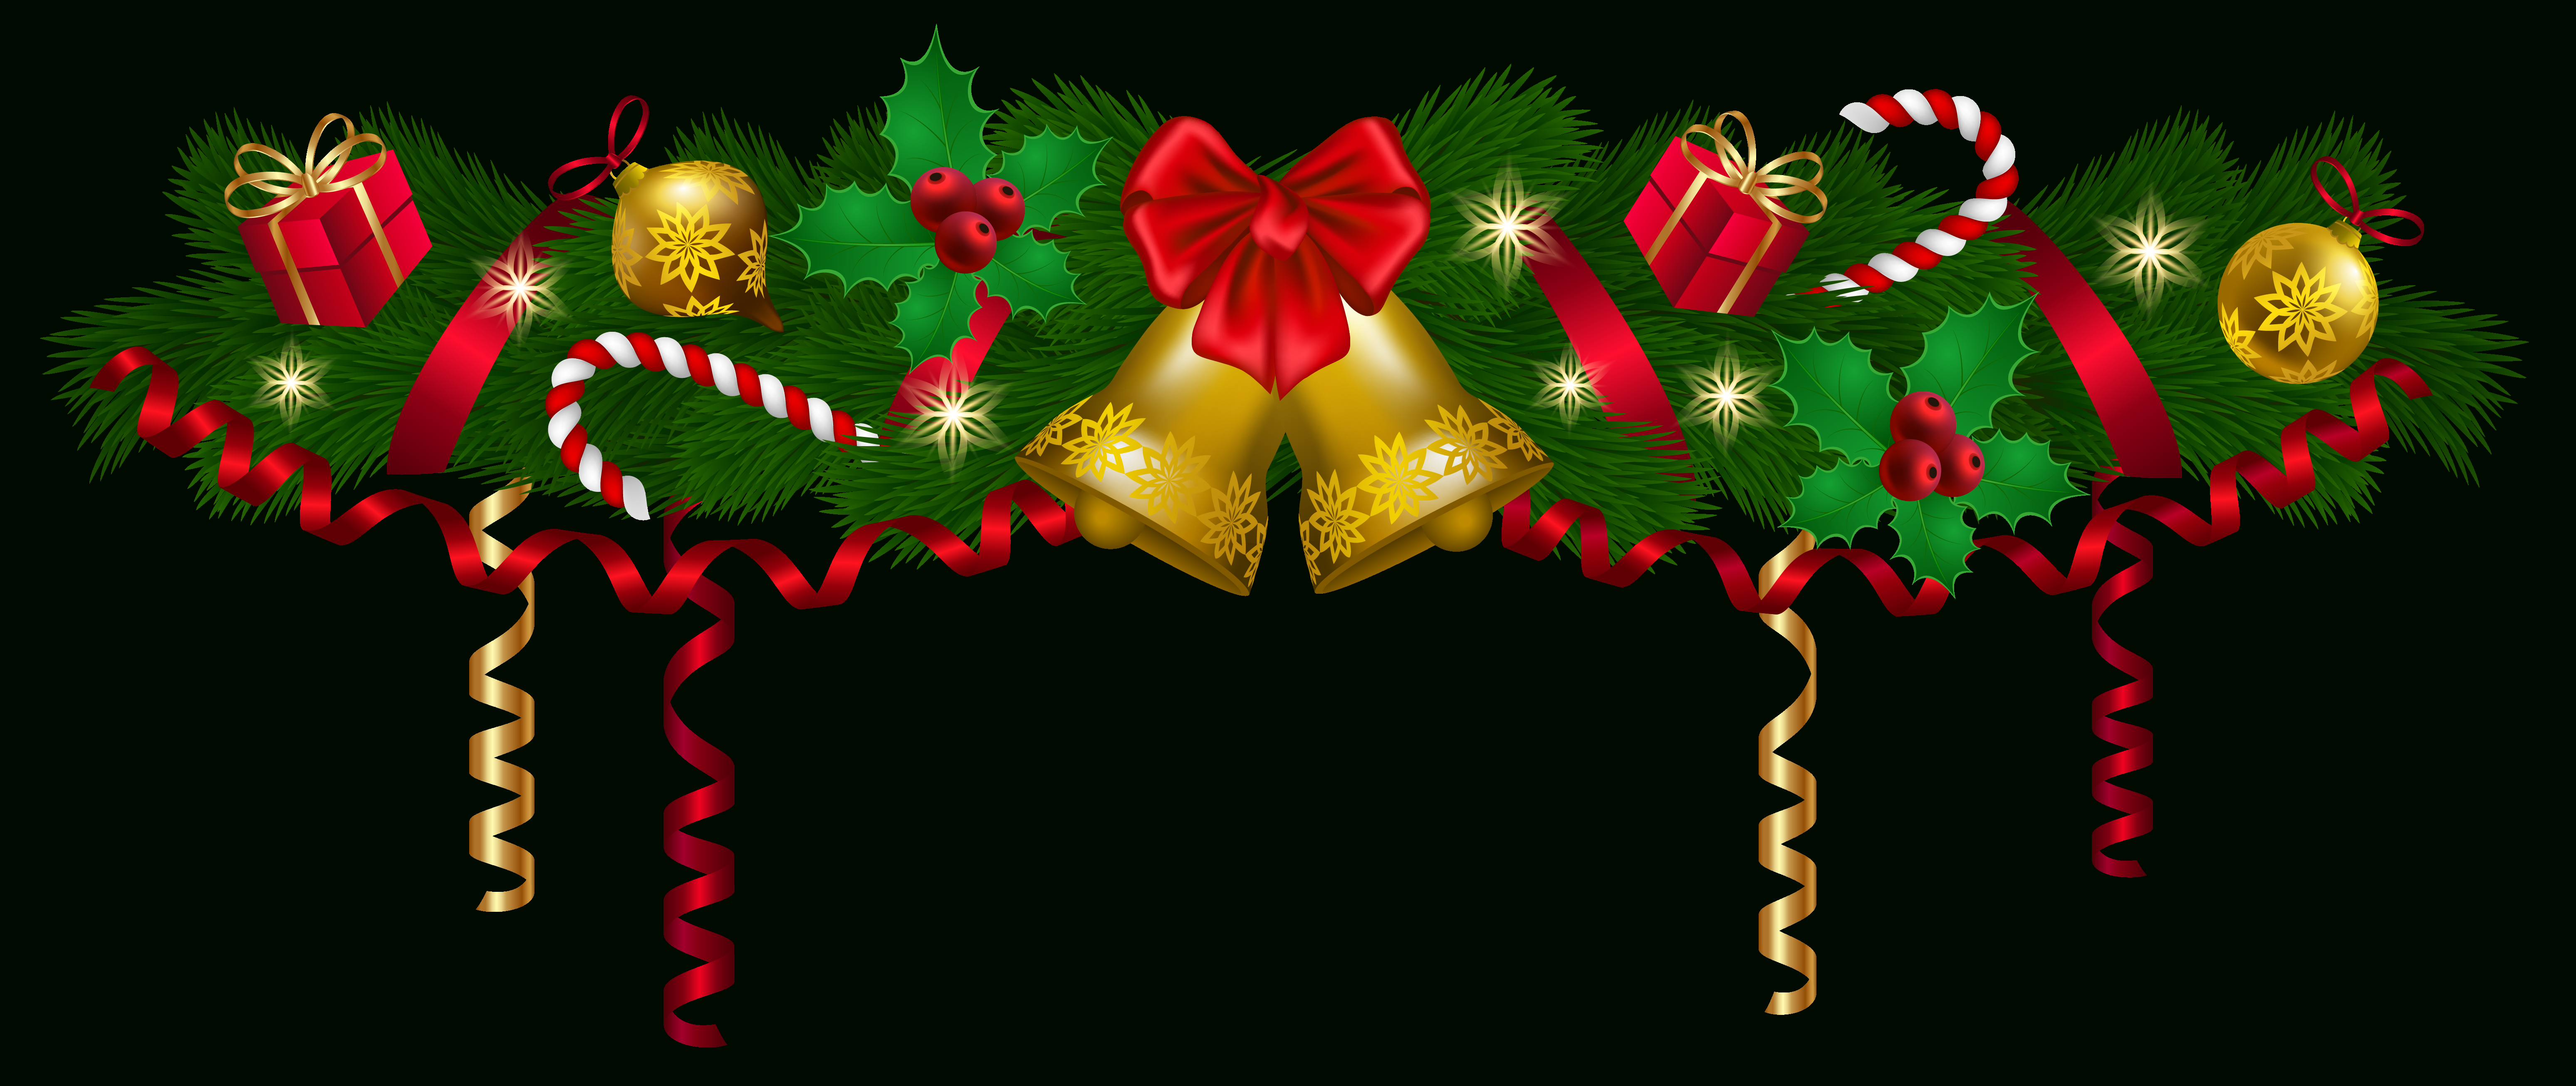 Holiday Garland Clipart | Free Download Best Holiday Garland Clipart - Christmas Garland Free Printable